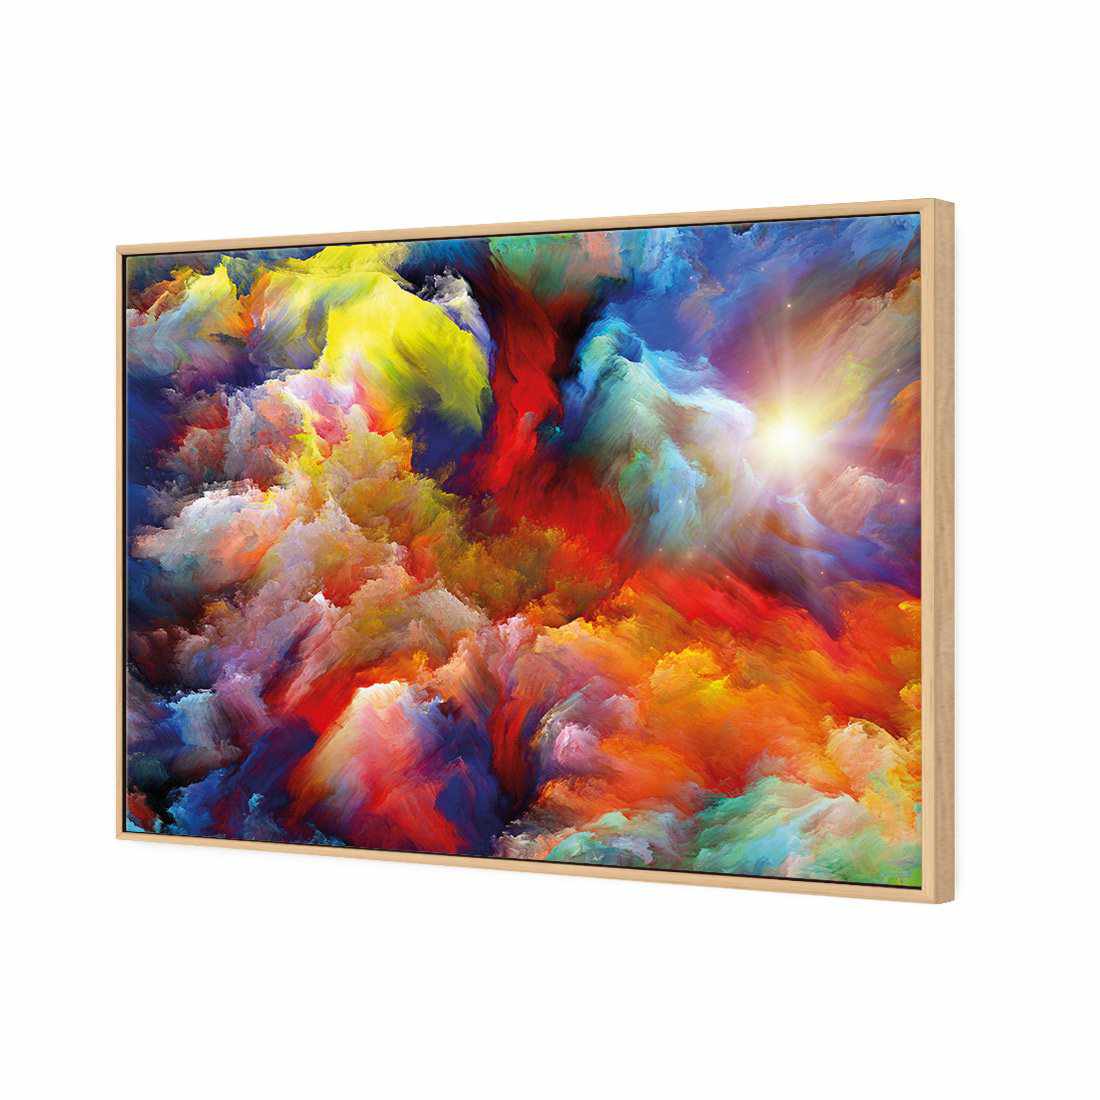 Clouds Of Colour Canvas Art-Canvas-Wall Art Designs-45x30cm-Canvas - Oak Frame-Wall Art Designs